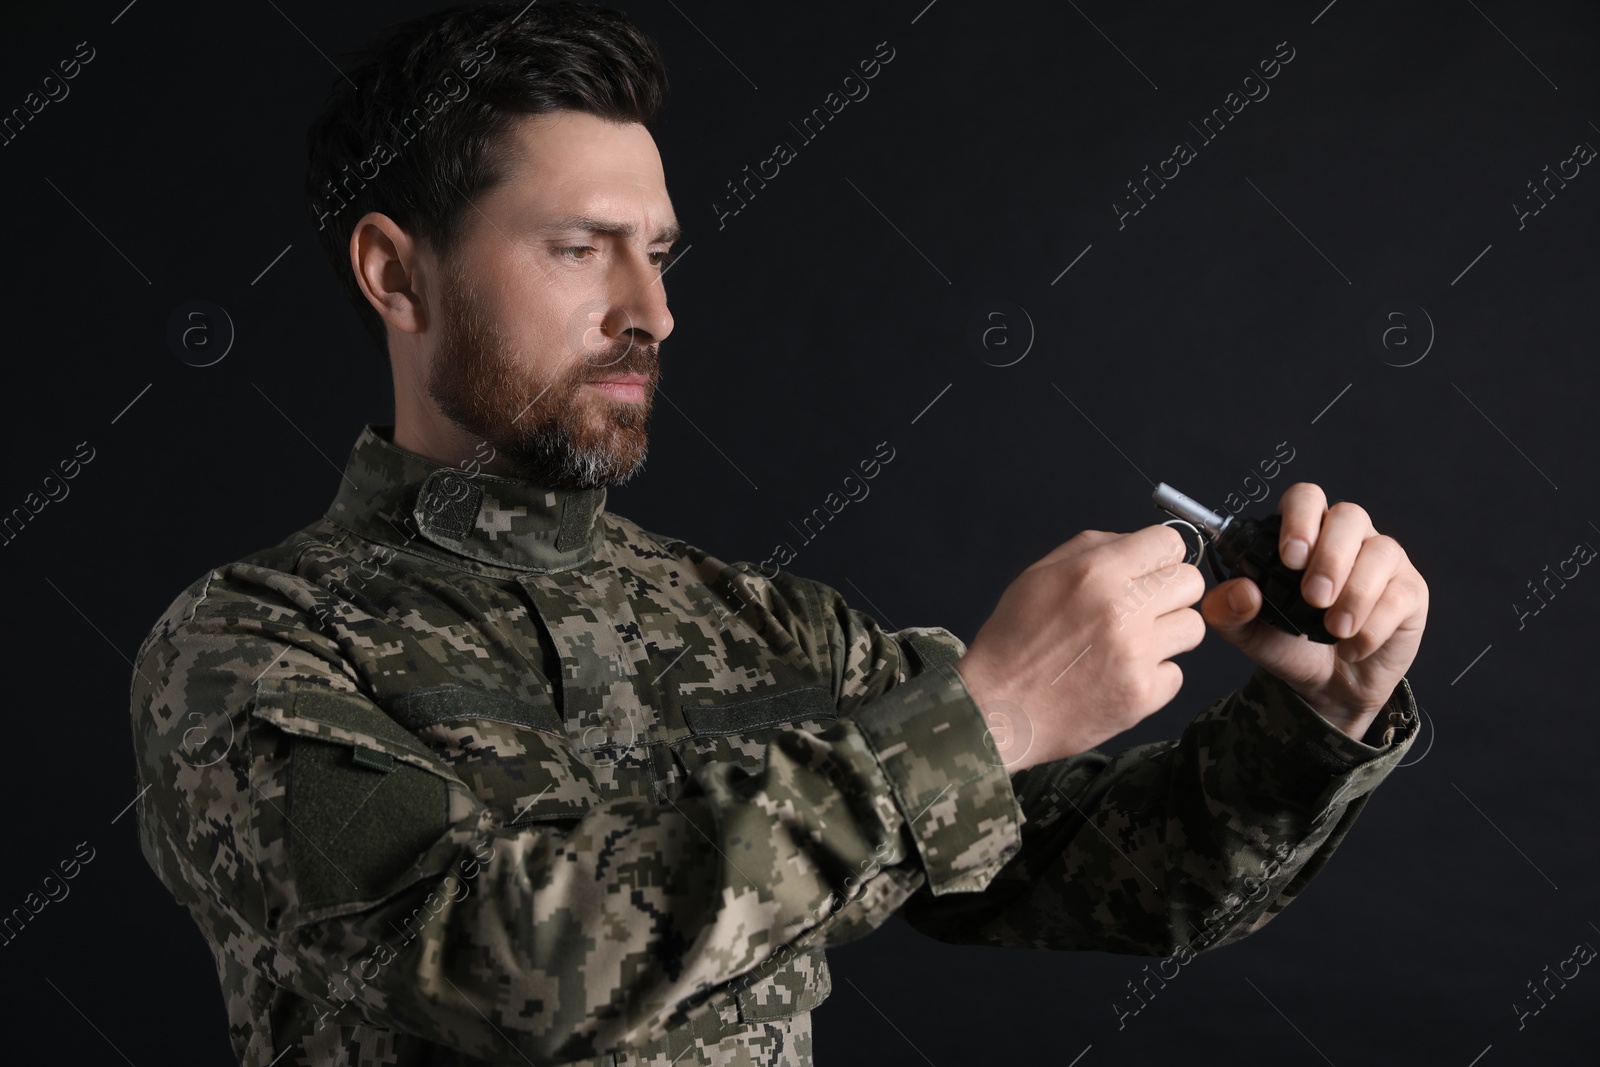 Photo of Soldier pulling safety pin out of hand grenade on black background. Military service